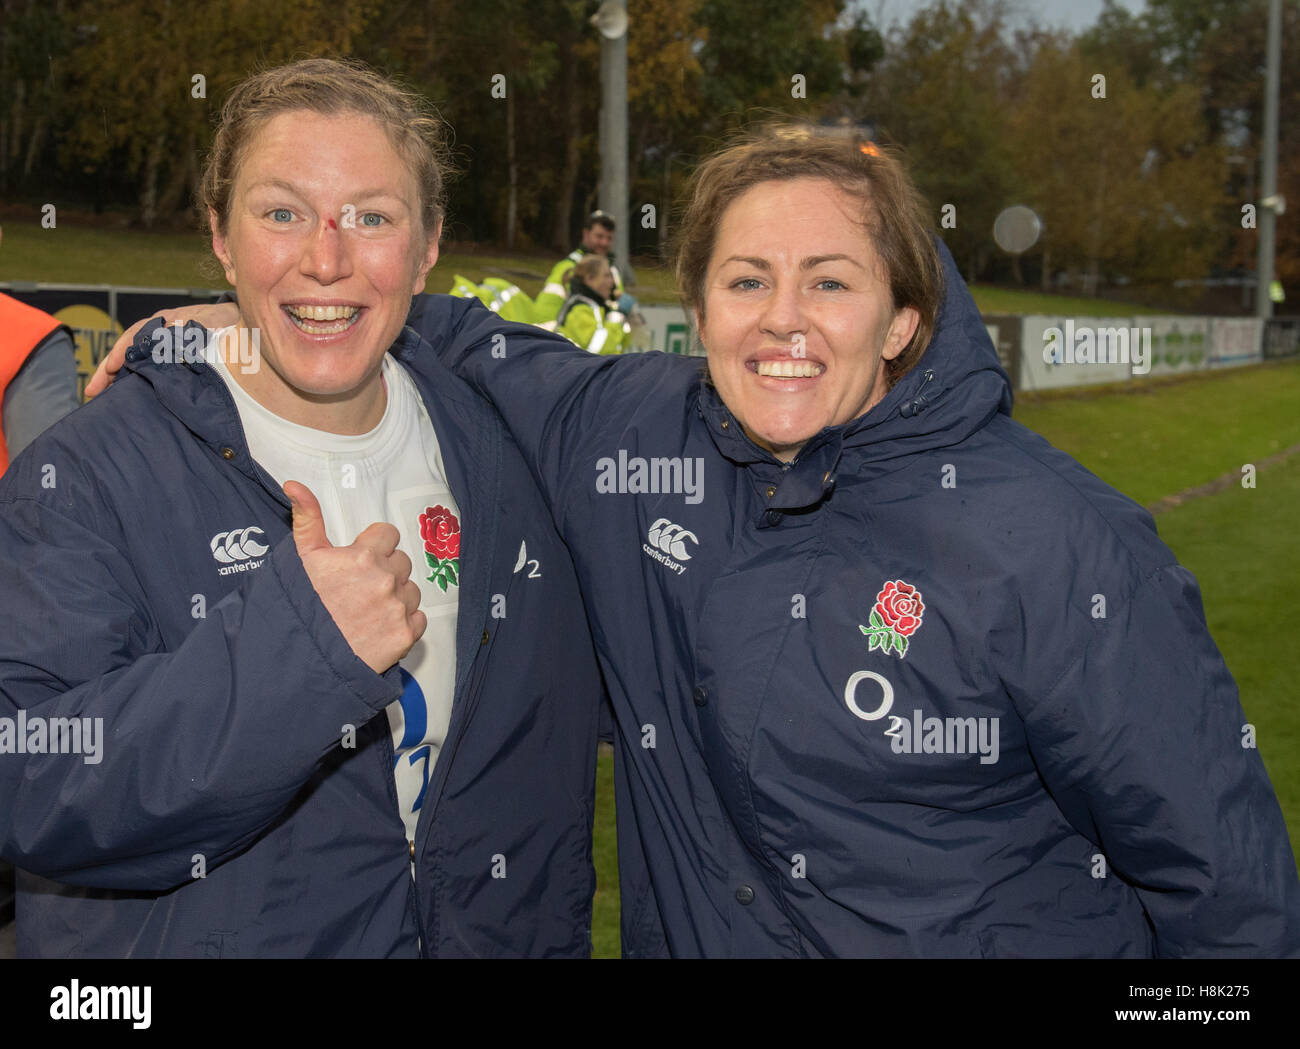 England women's Rochelle Clark (left) poses for a picture after the Old Mutual Wealth Series match at University College Dublin. Clark has overtaken Jason LeonardÂ’s record to become EnglandÂ’s most capped player with 115 games, equalling Donna KennedyÂ’s record in the womenÂ’s game. Stock Photo